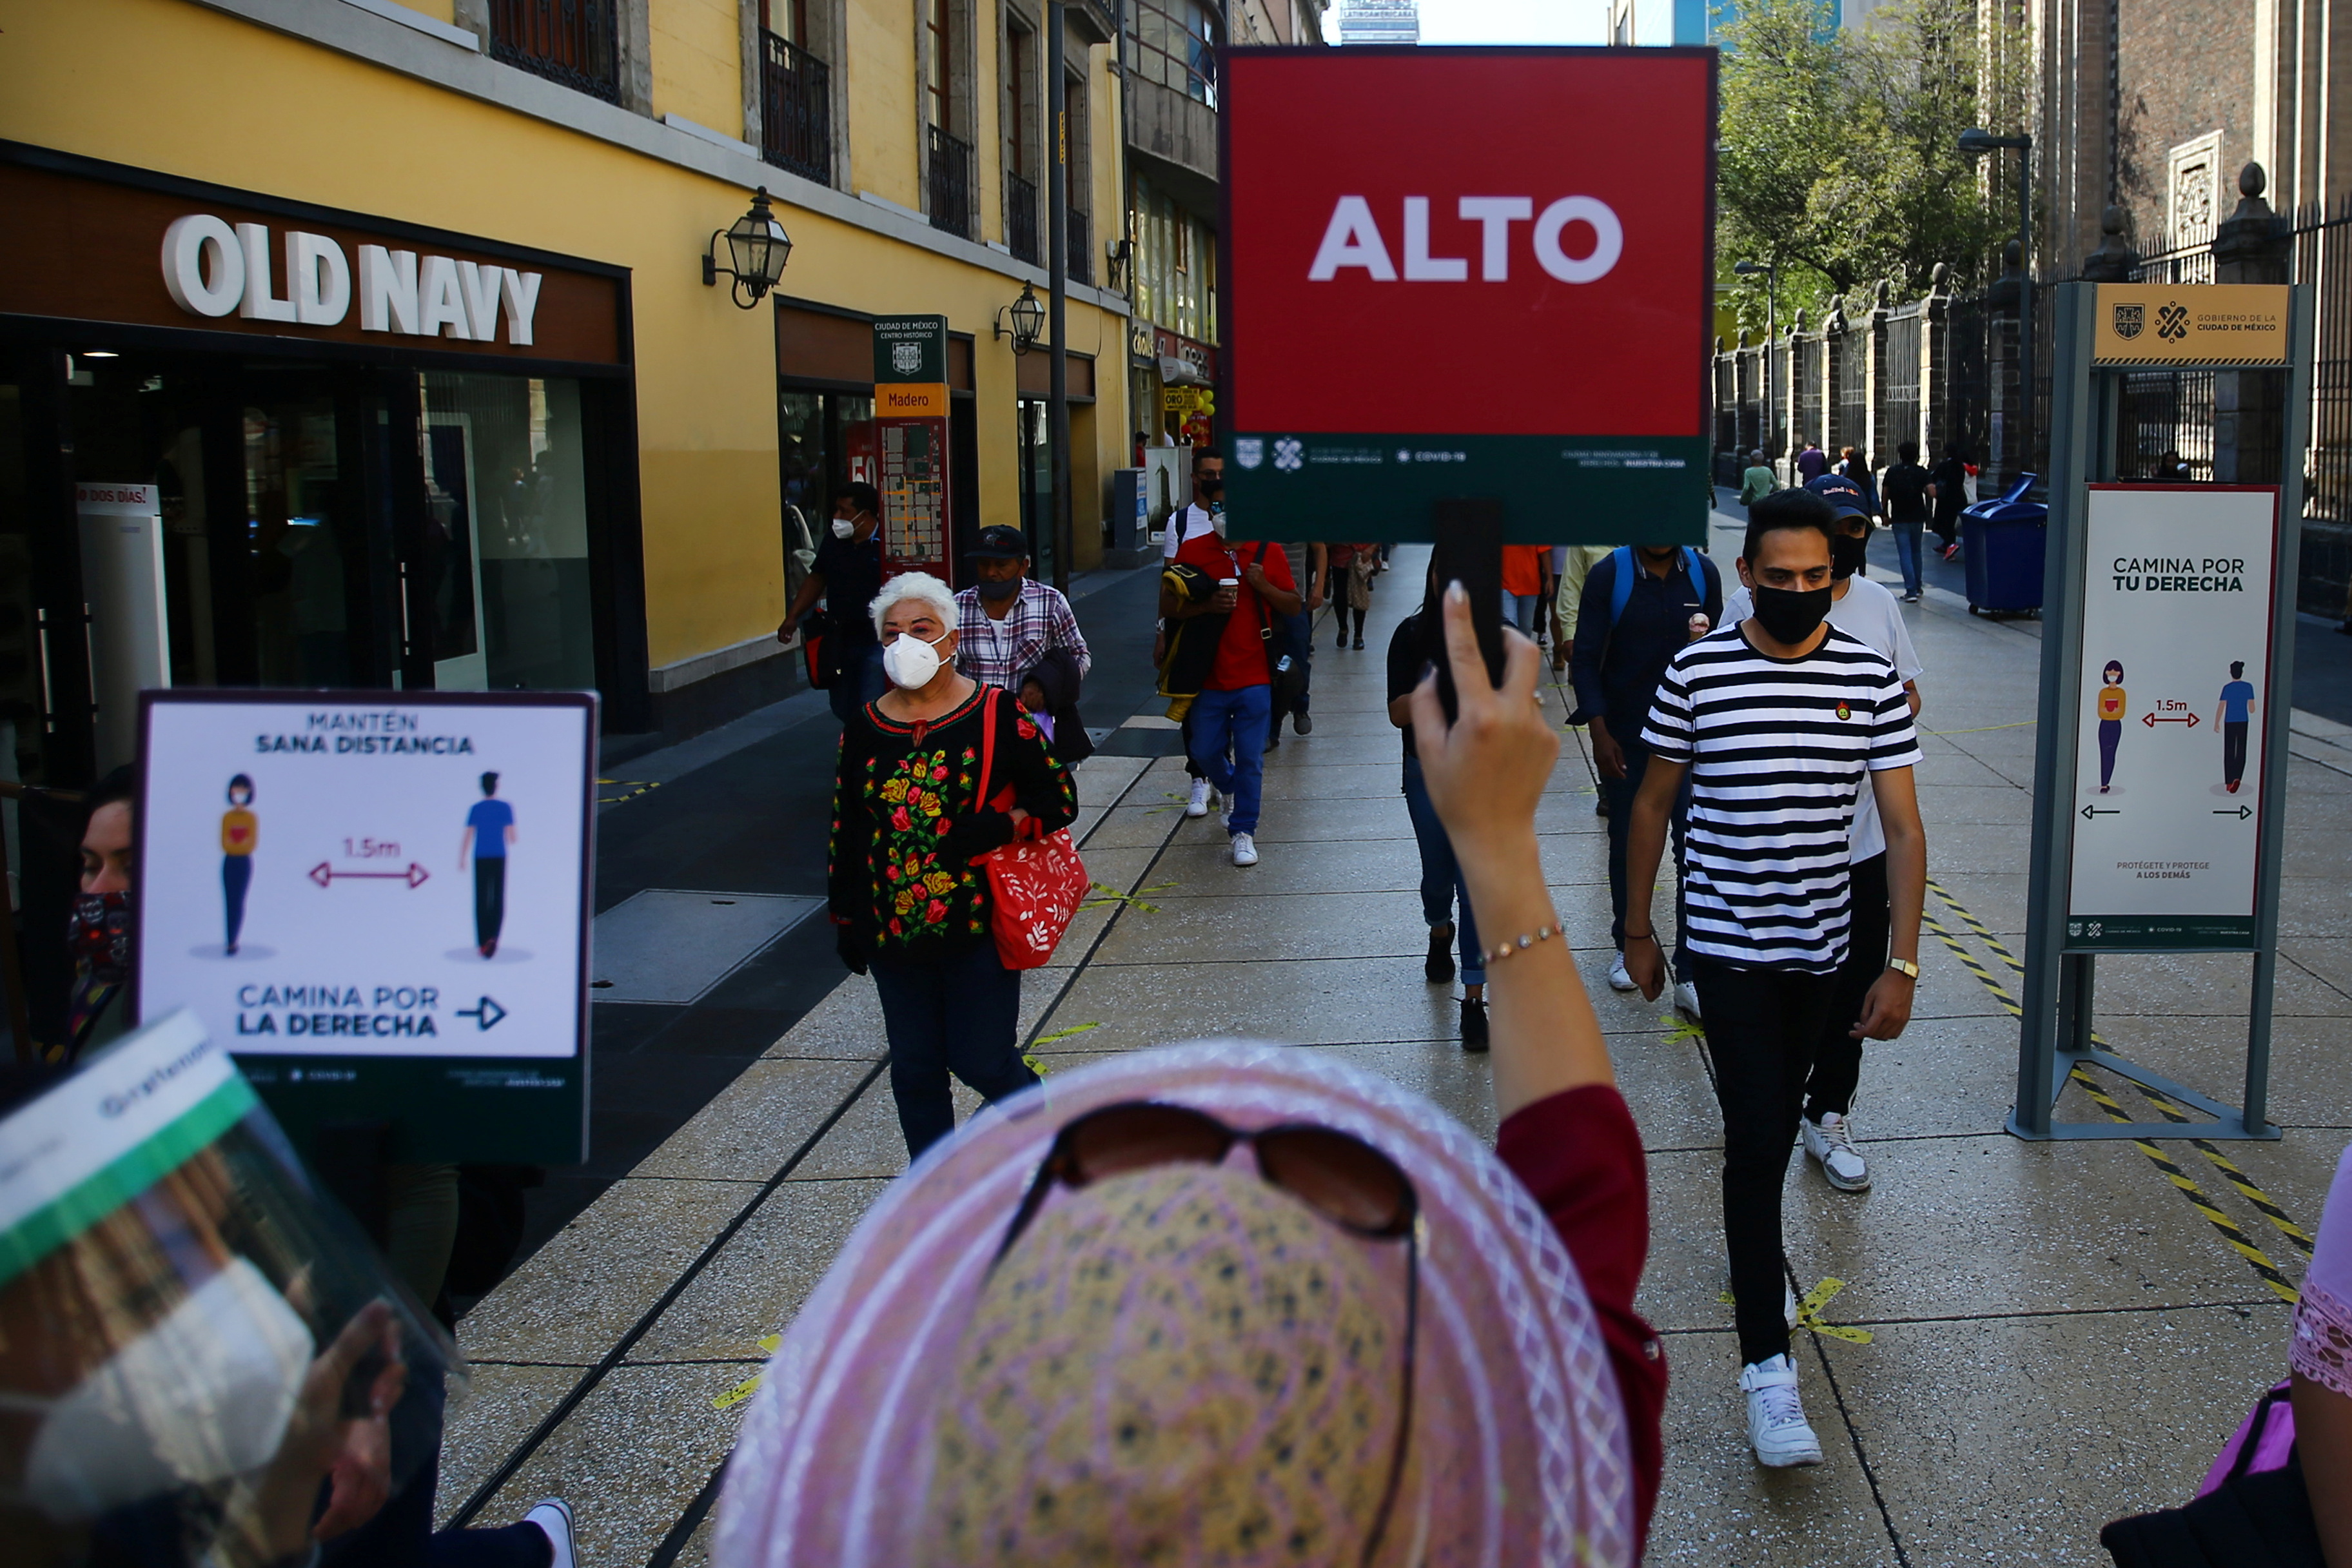 An employee holds a sign that reads " Stop" to organize people walking in downtown Mexico City as part of the measures during the spread of the coronavirus disease (COVID-19), Mexico November 13, 2020. REUTERS/Edgard Garrido